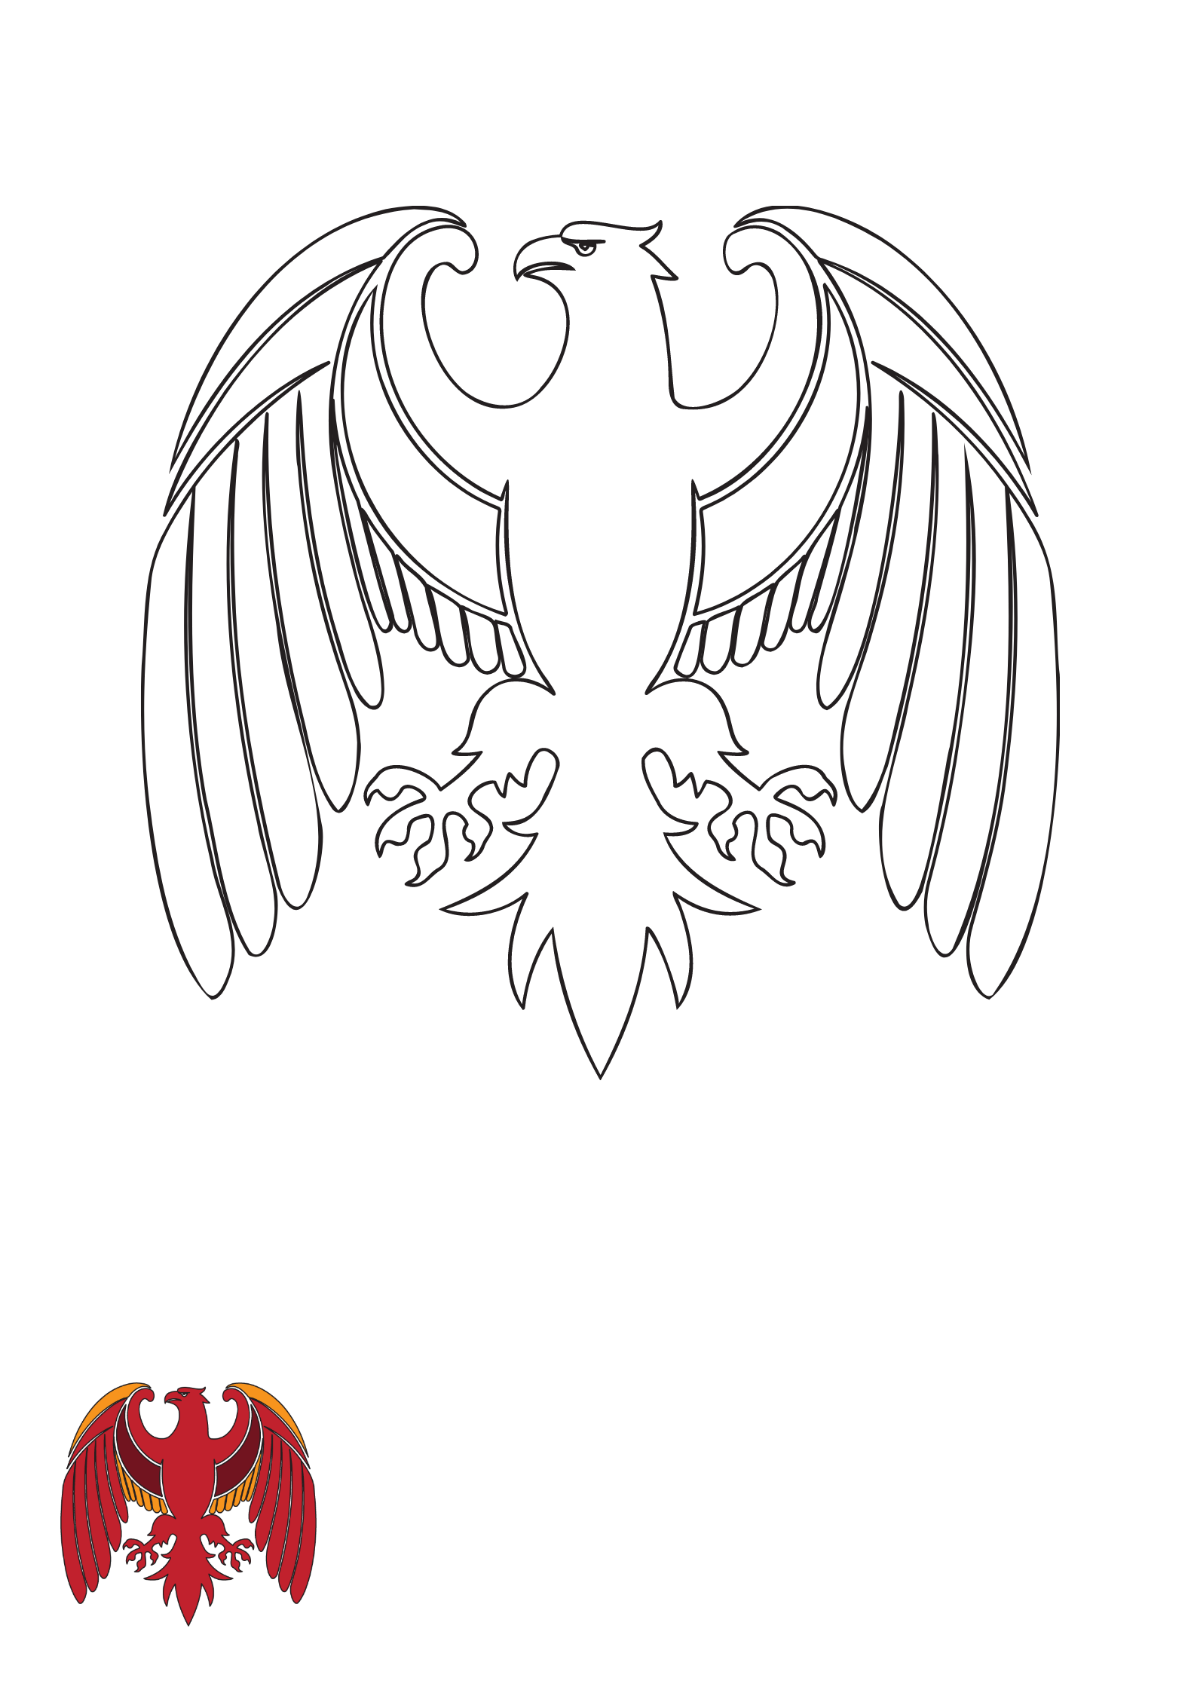 Free Heraldic Eagle coloring page Template